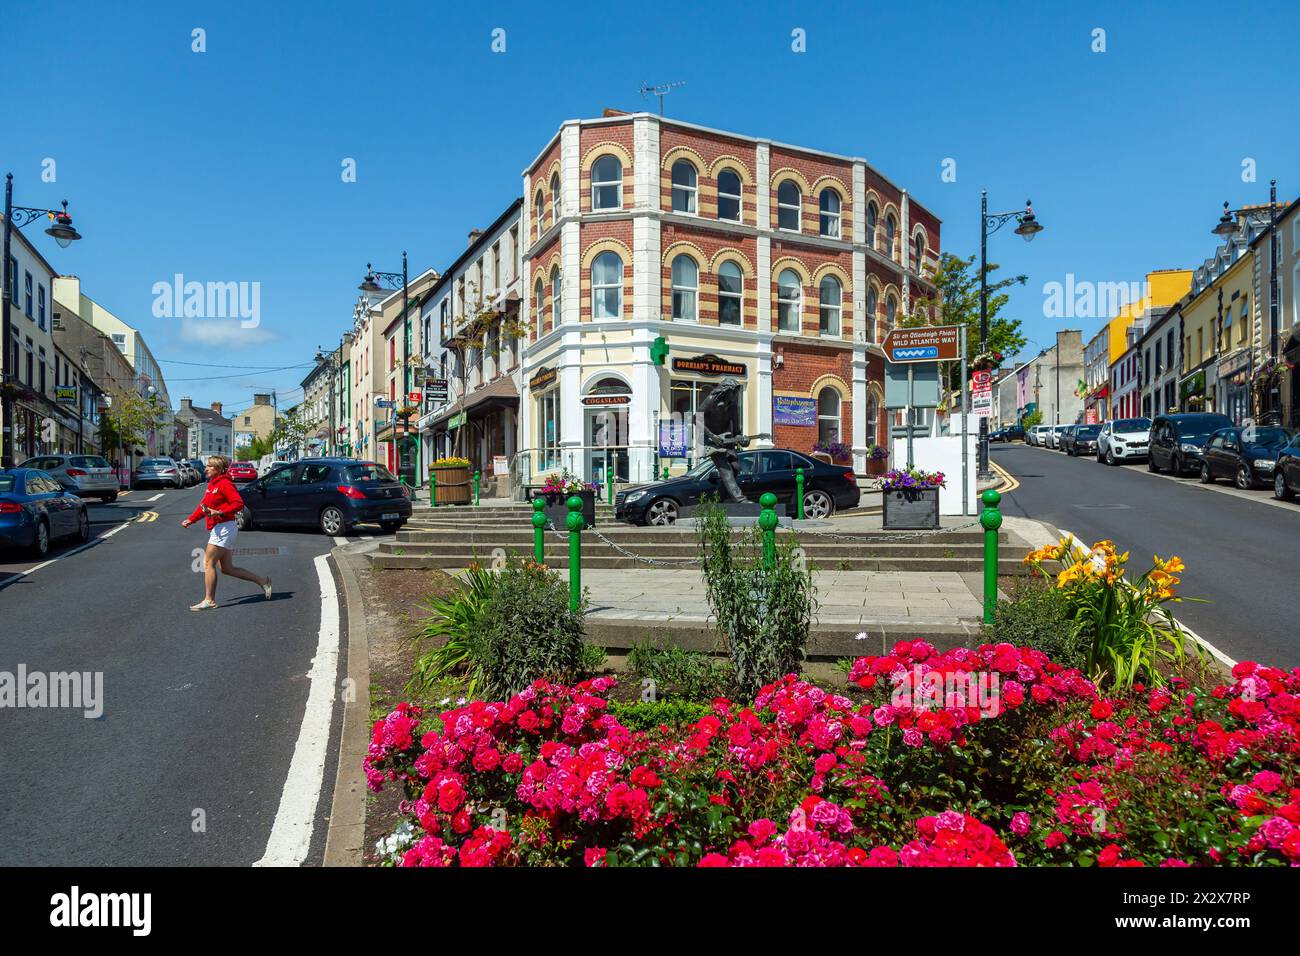 20.07.2019, Ballyshannon, County Donegal, Ireland - Ireland's Oldest Town, crossroads in the center with the Rory Gallagher statue. 00A190720D089CAROE Stock Photo